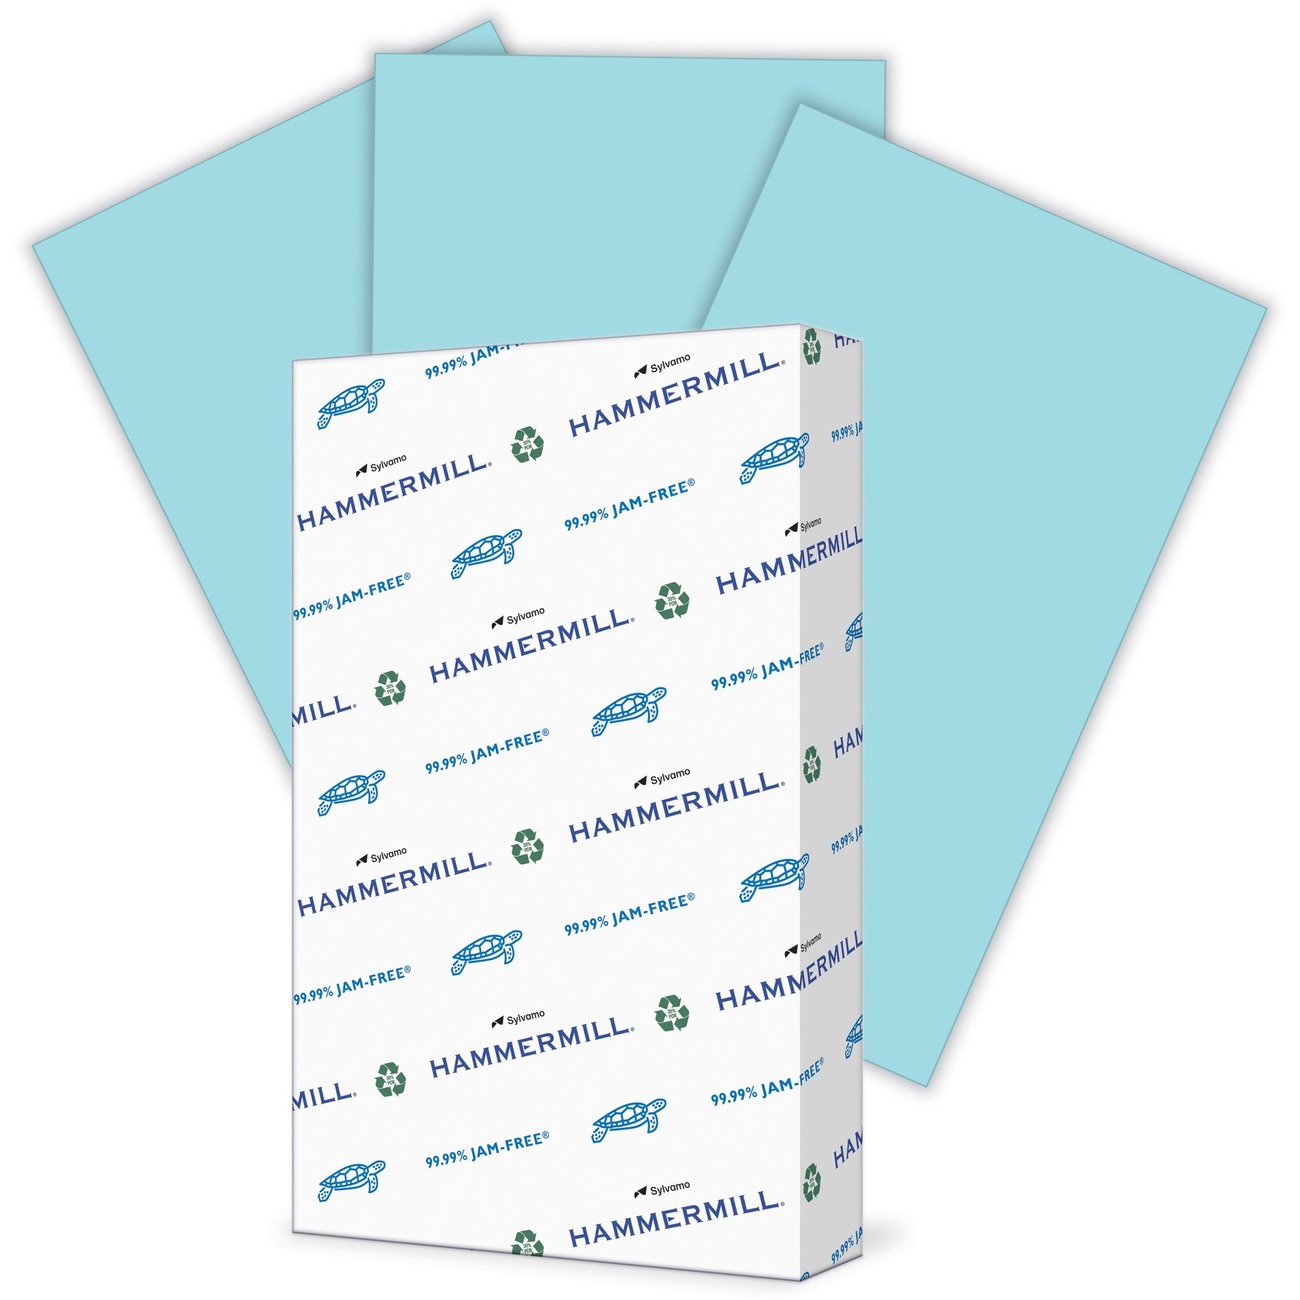 Hammermill Printer Paper, 20lb Great White 30% Recycled Paper, 8.5x11, 10  Reams 